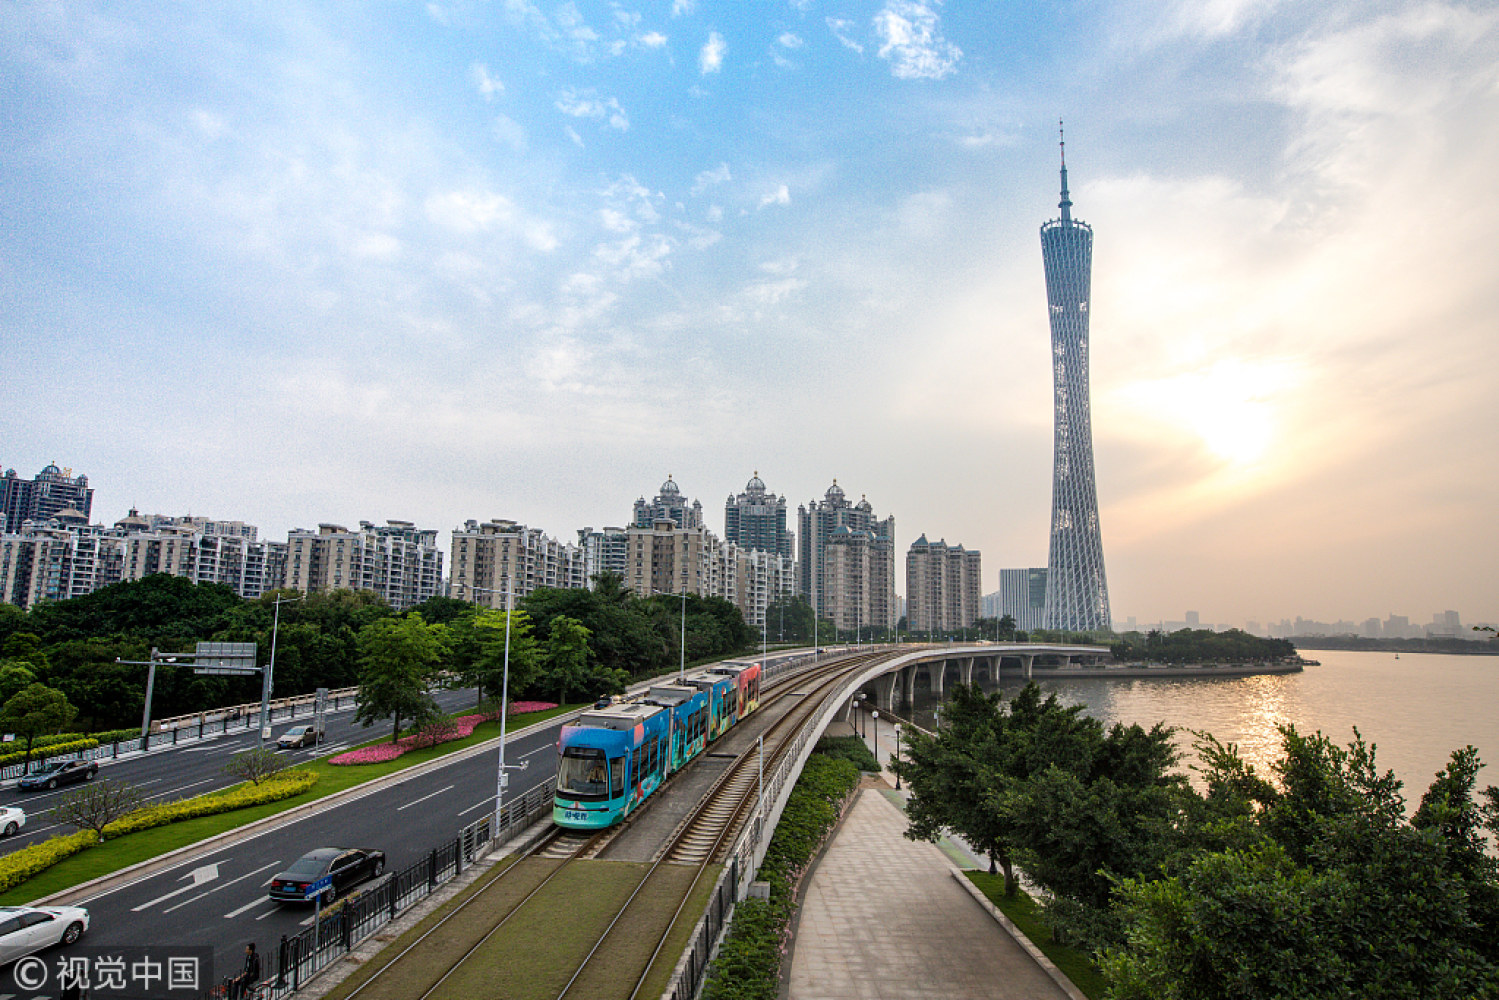 The Canton Tower stands in Guangzhou, Guangdong province. [Photo/VCG]